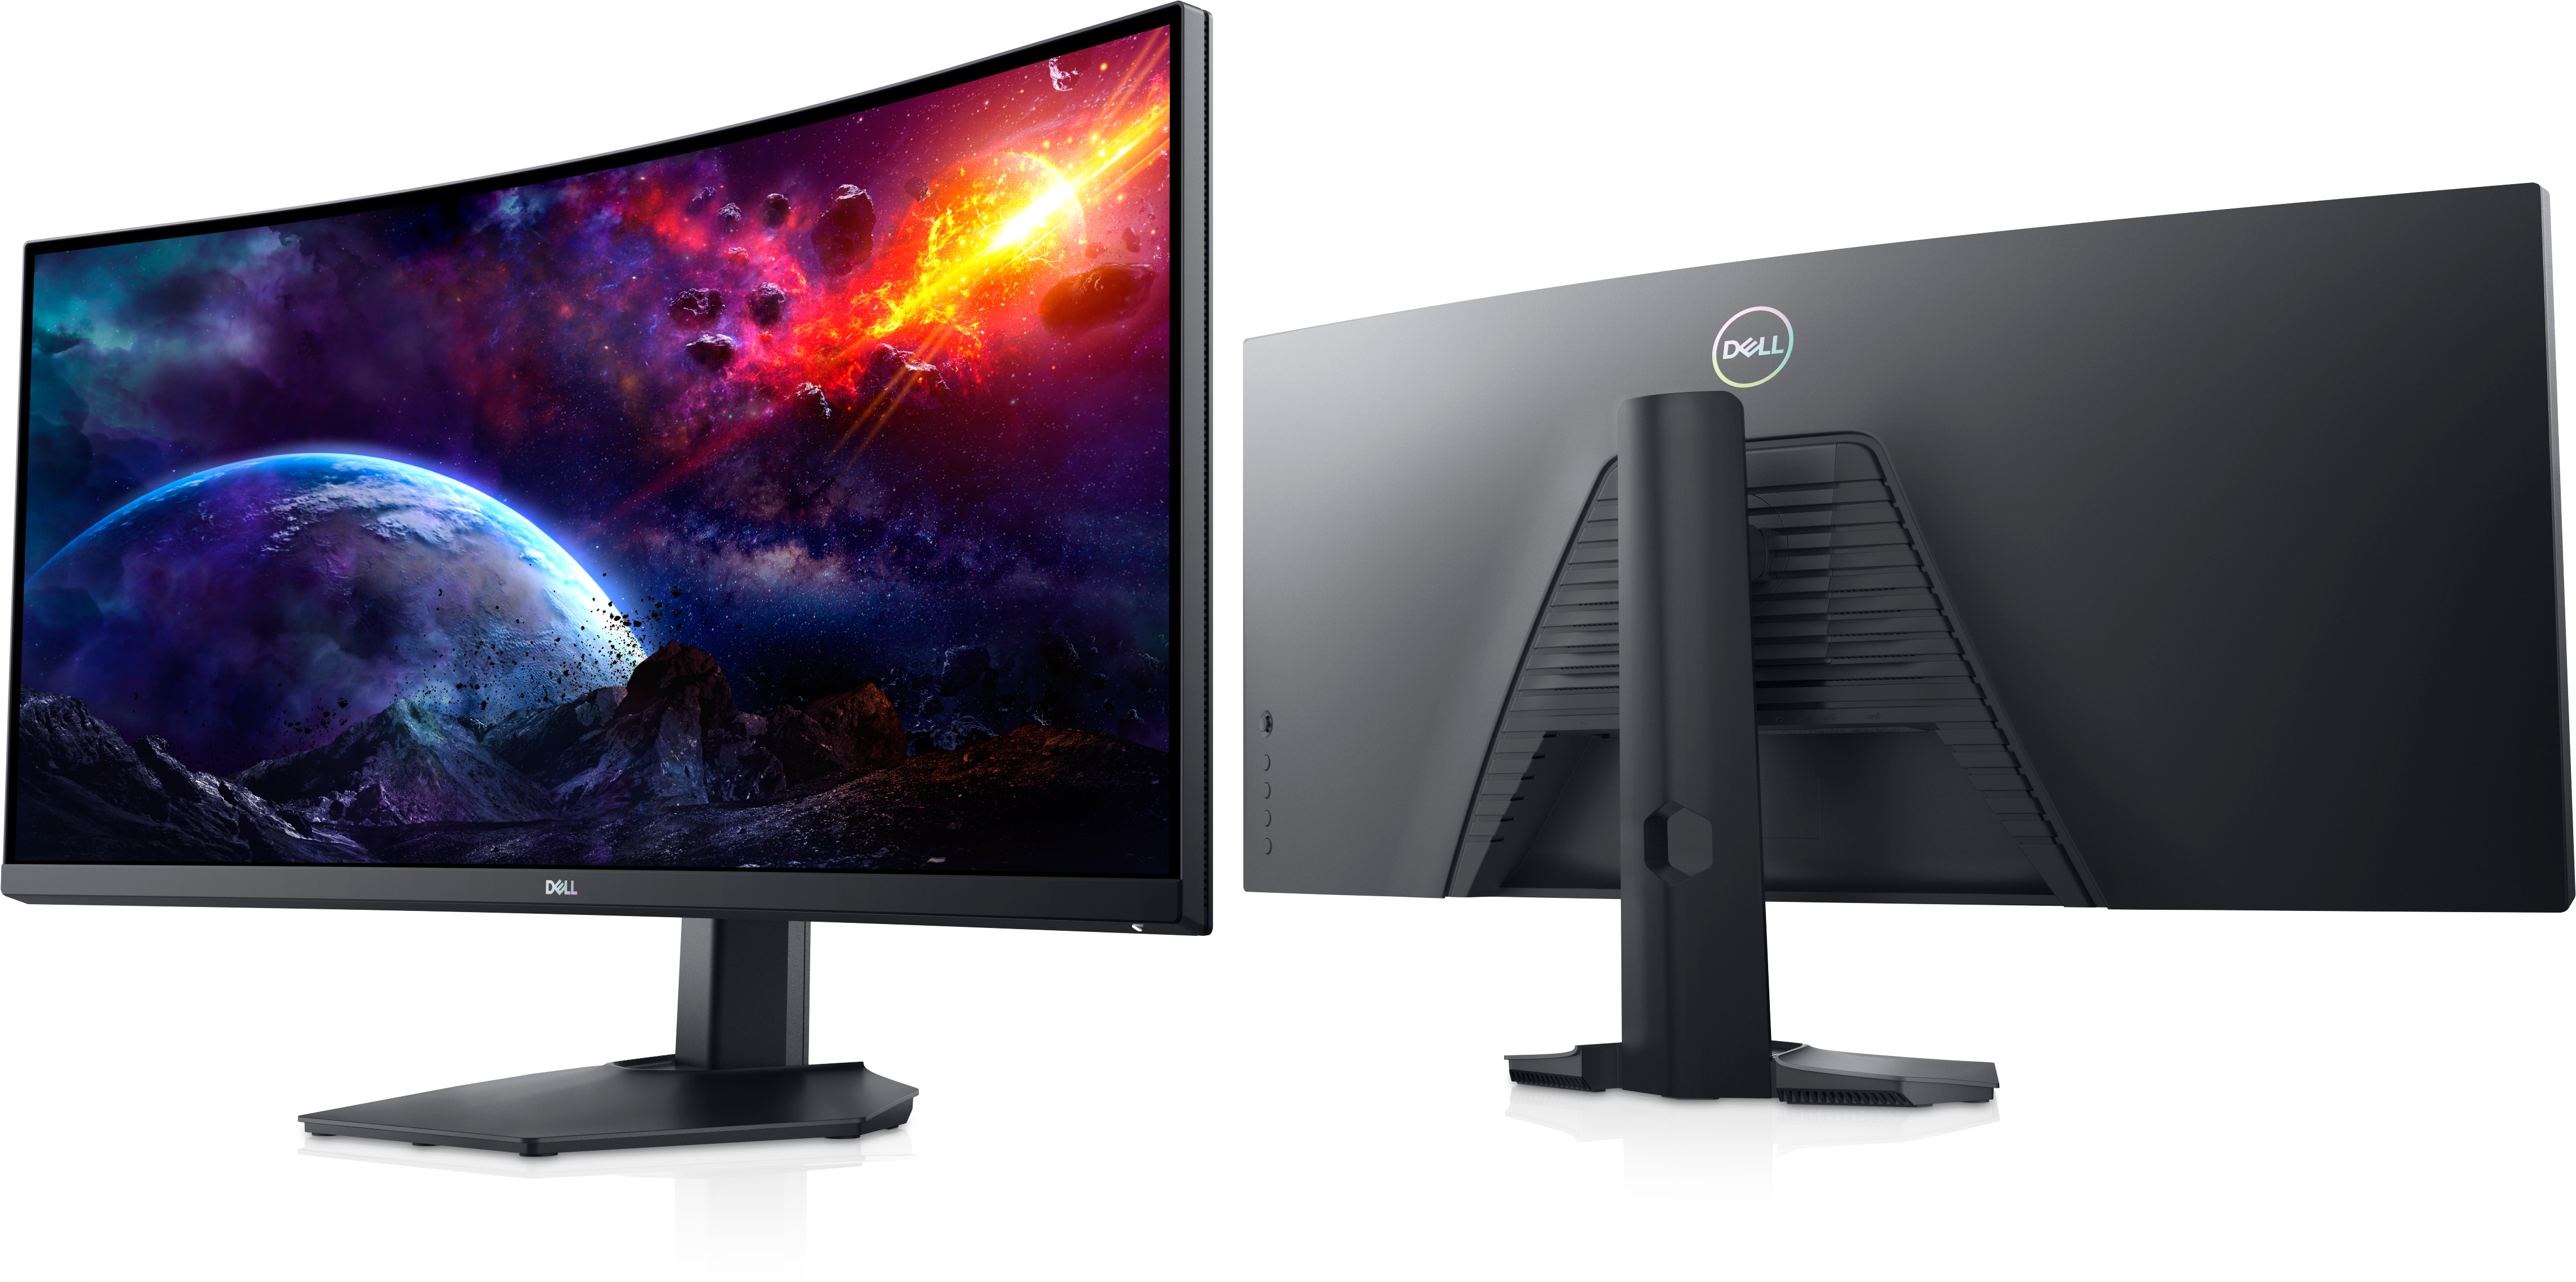 Dell 34 WQHD Curved Gaming Monitor – S3422DWG | Dell USA